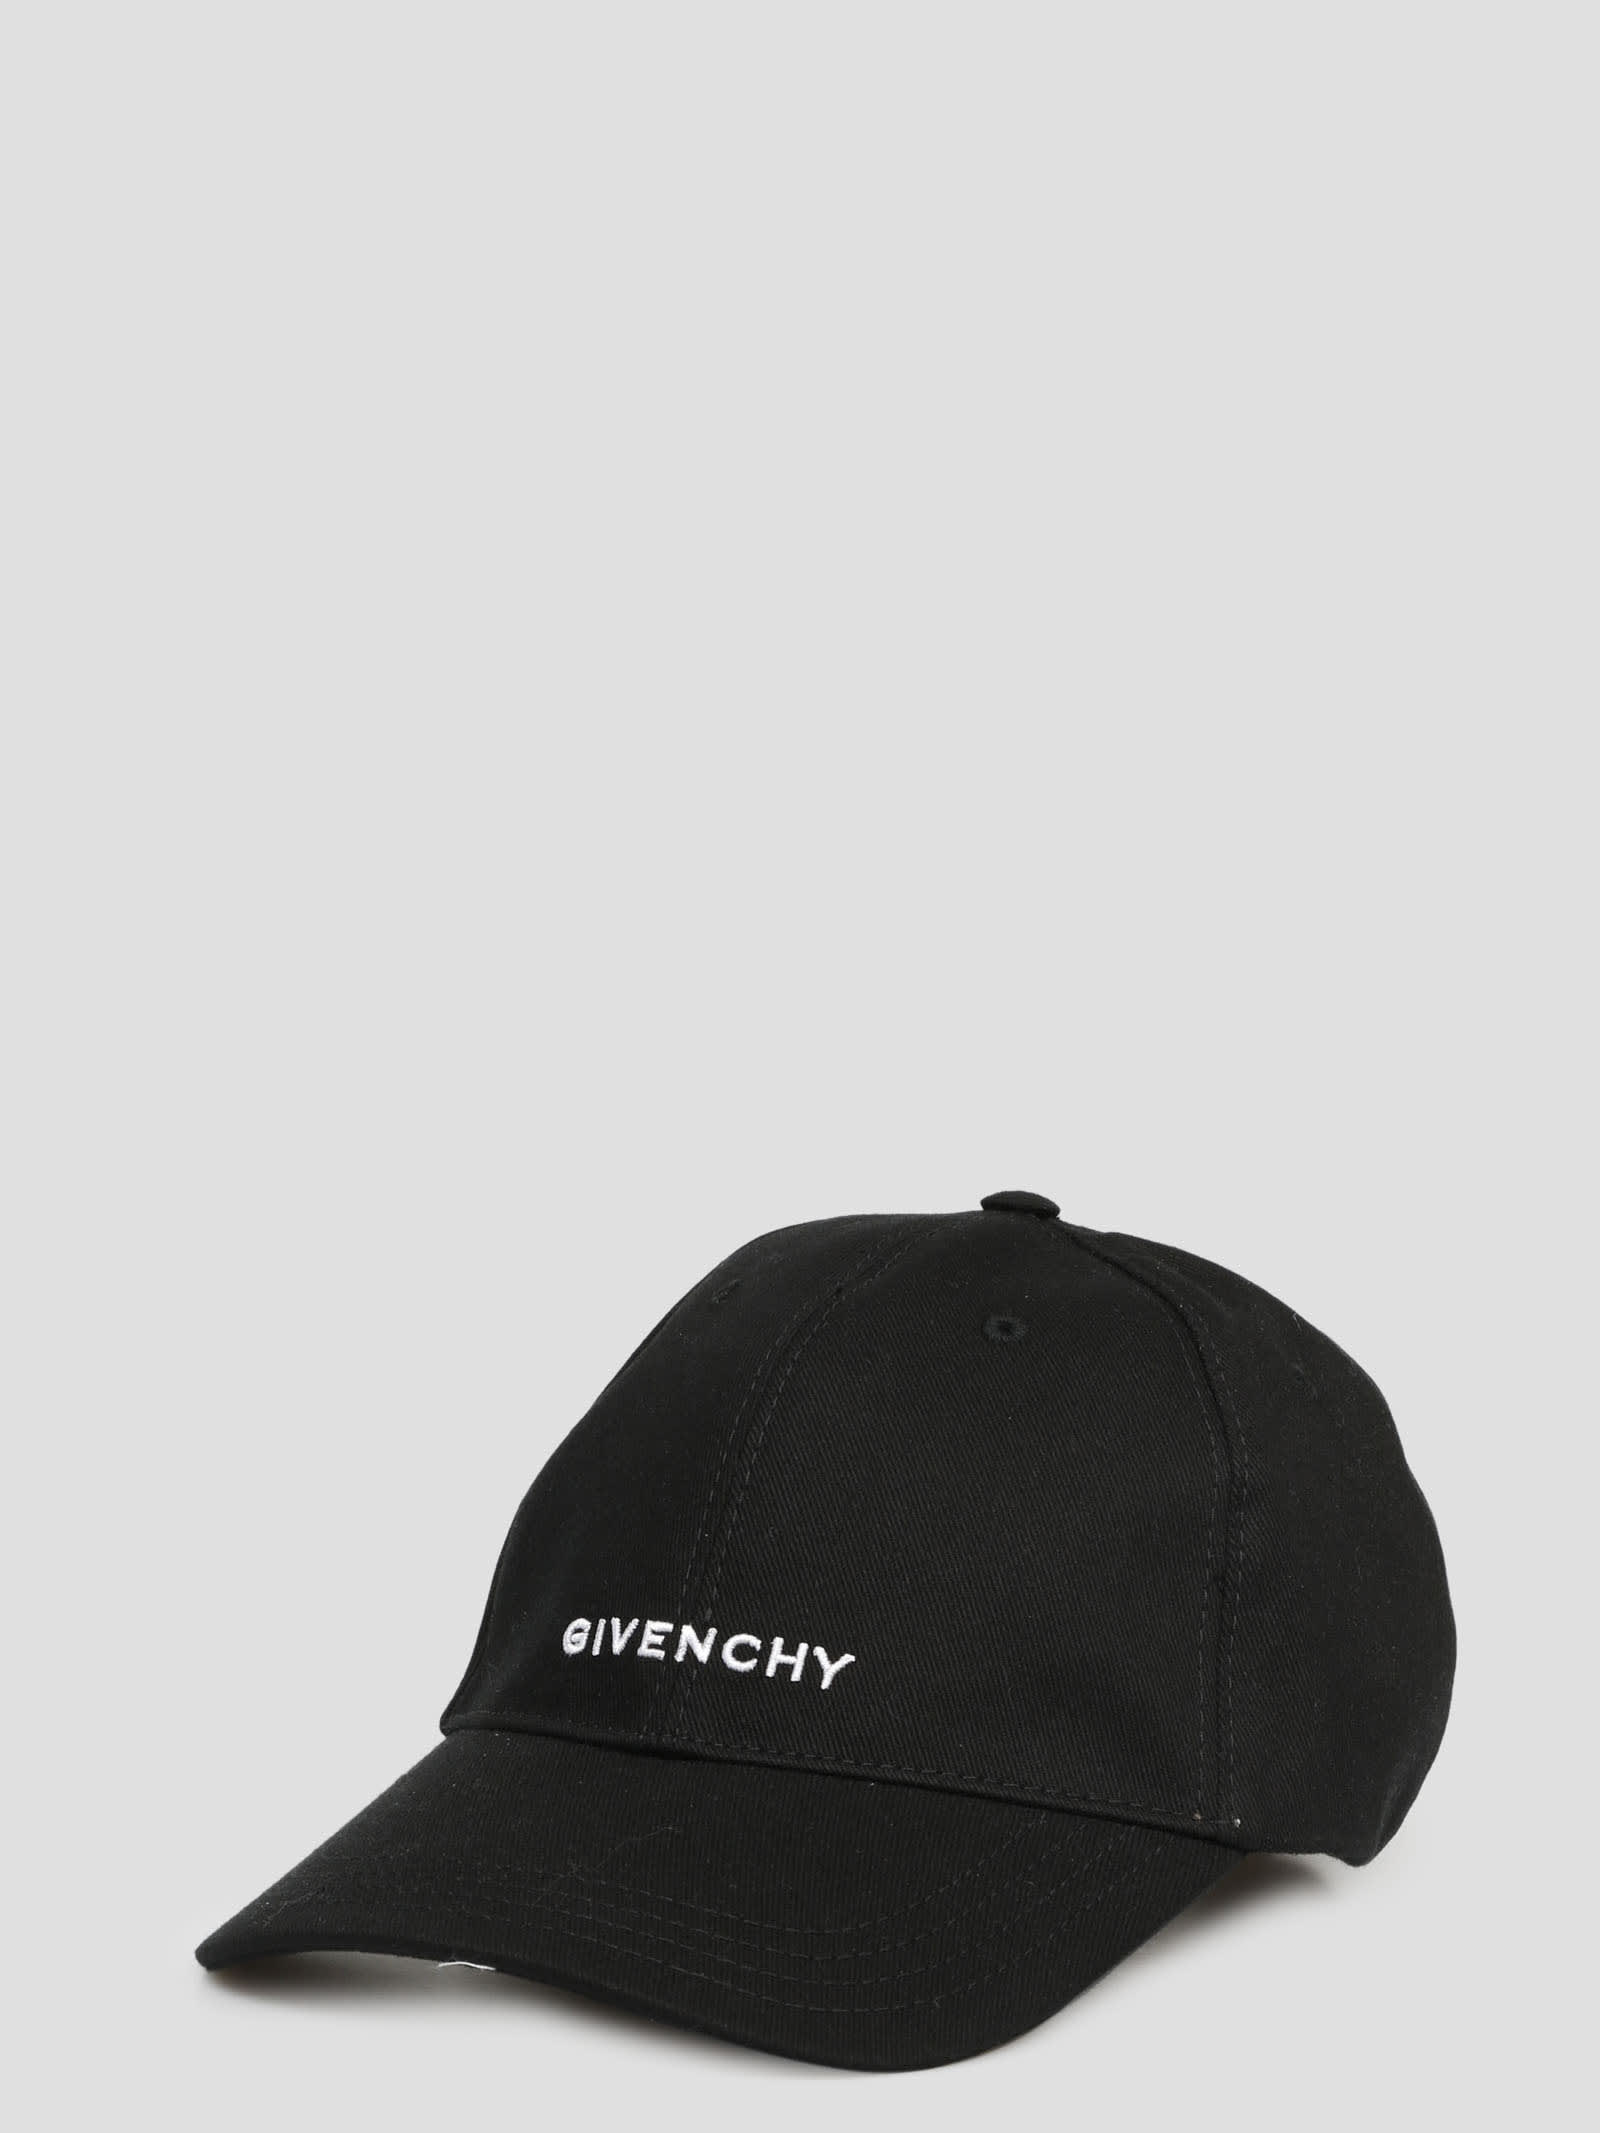 GIVENCHY LOGO CURVED CAP